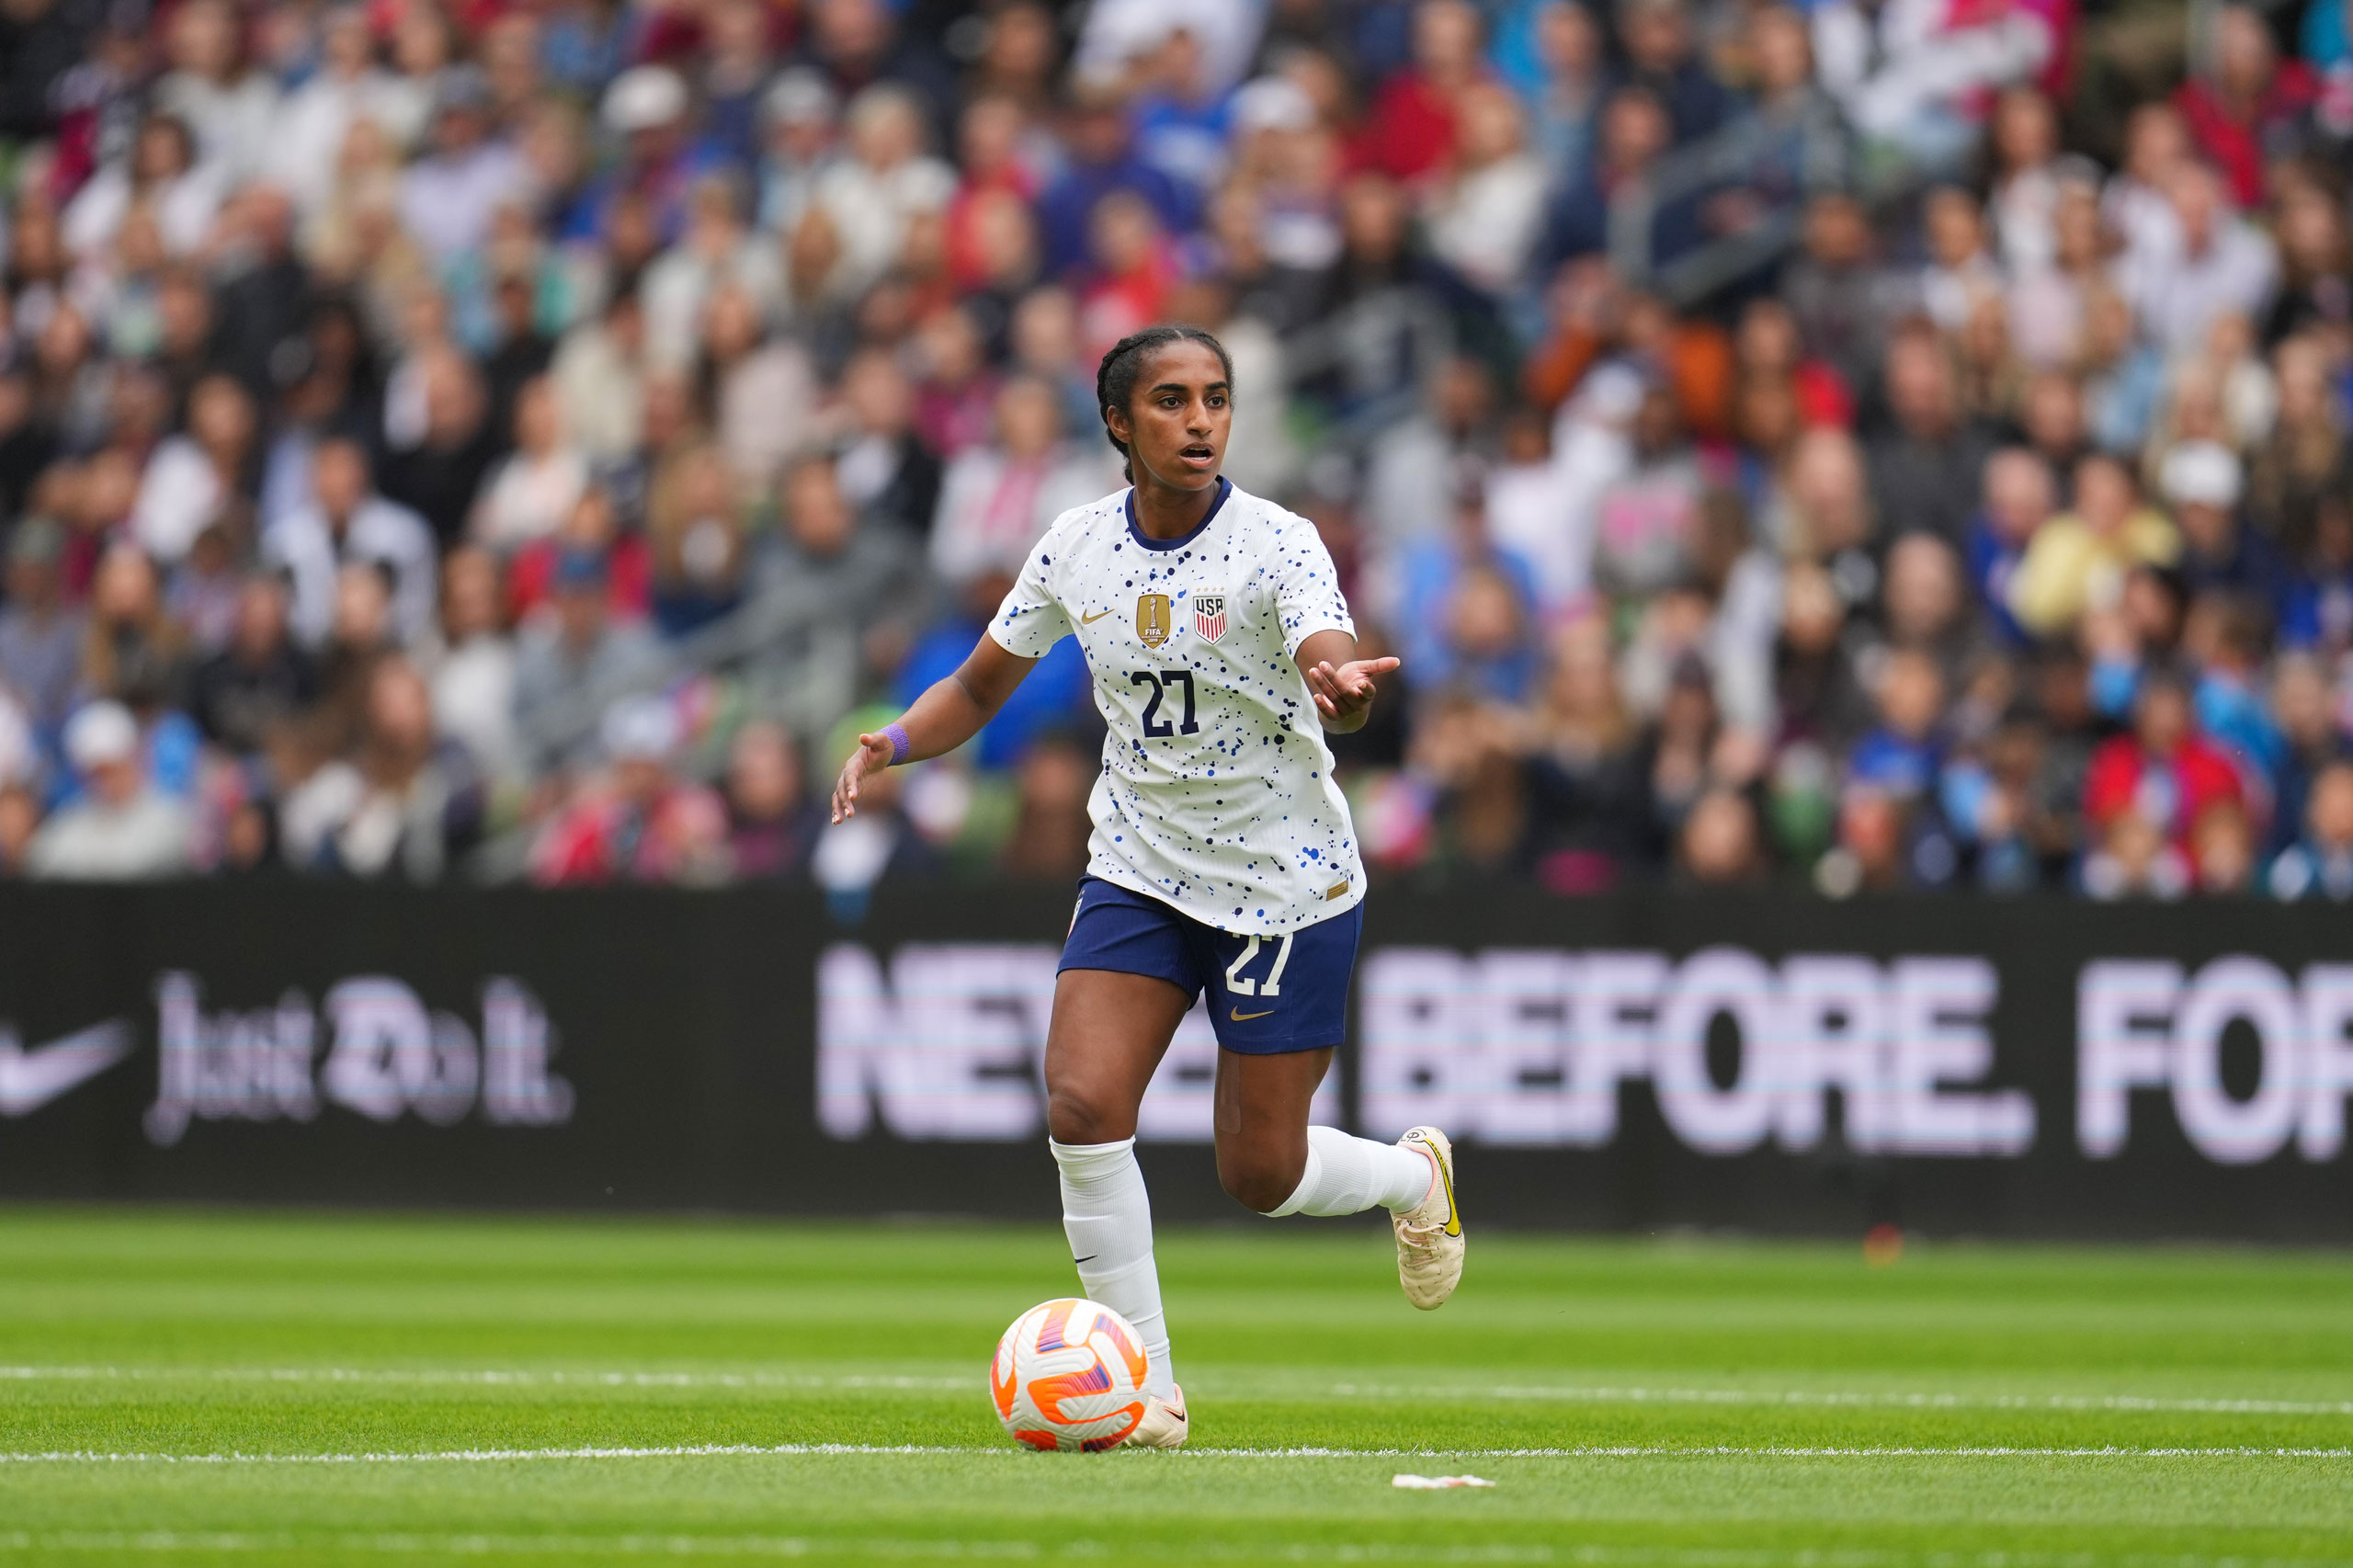 Naomi Girma looks to pass during a game between Ireland and USWNT in Austin, Texas, on April 8, 2023. (Brad Smith—USSF/Getty Images)